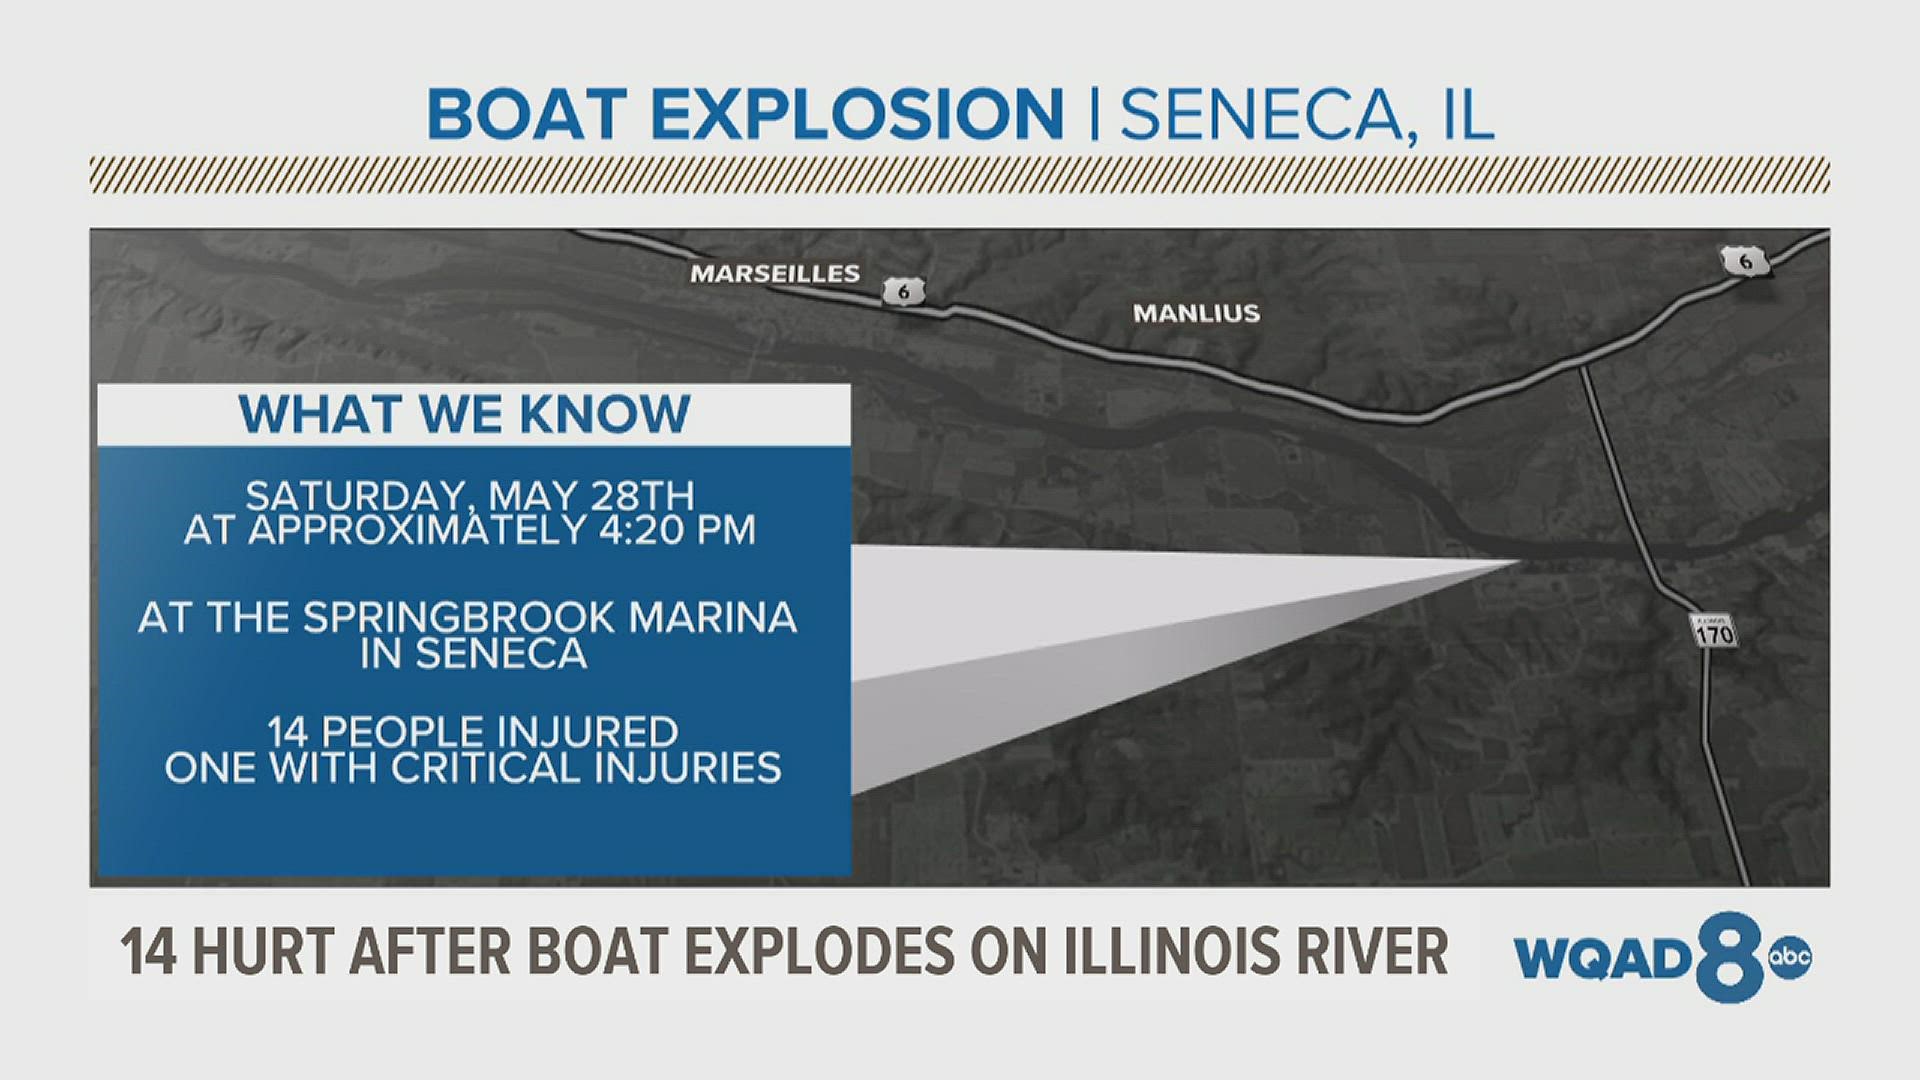 Illinois DNR officials say that a boat exploded just after refueling on the Illinois River near Seneca on Saturday afternoon, injuring 14 people.